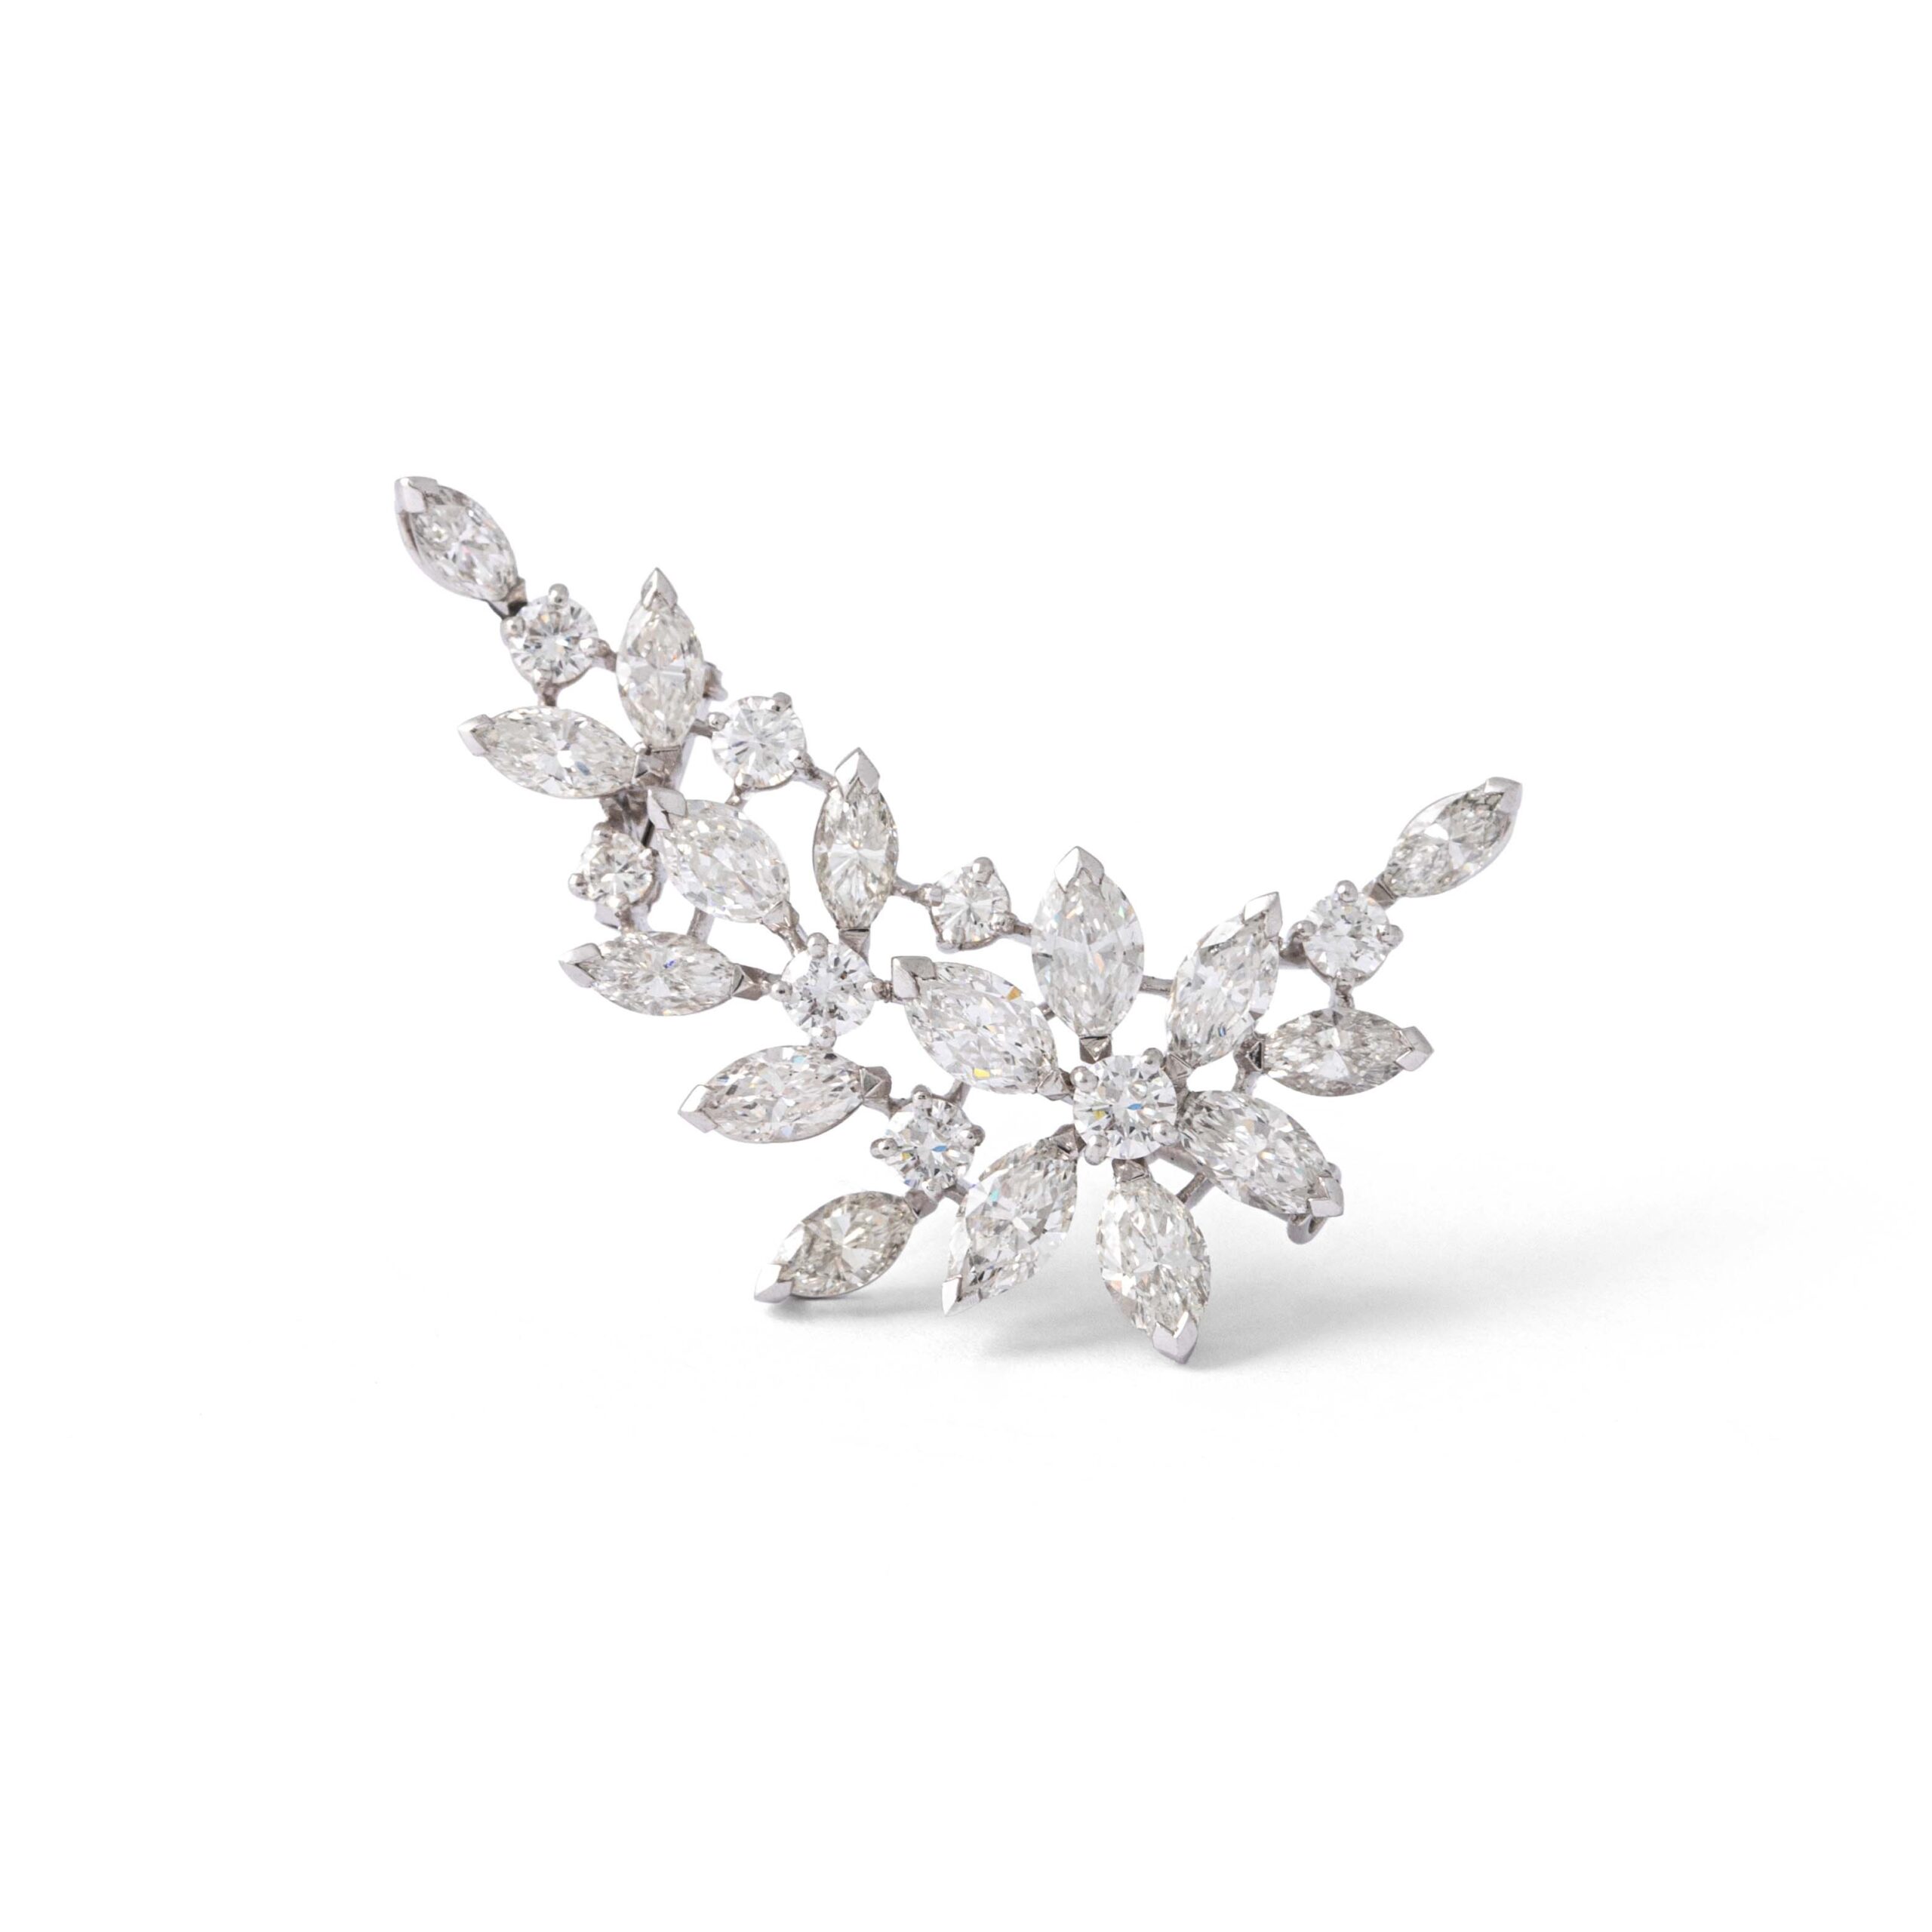 Front view Diamond 18K White Gold Brooch. 8 round cut diamond weighing about 0.95 carat total and 16 marquise cut diamond weighing about 1.95 carat total.